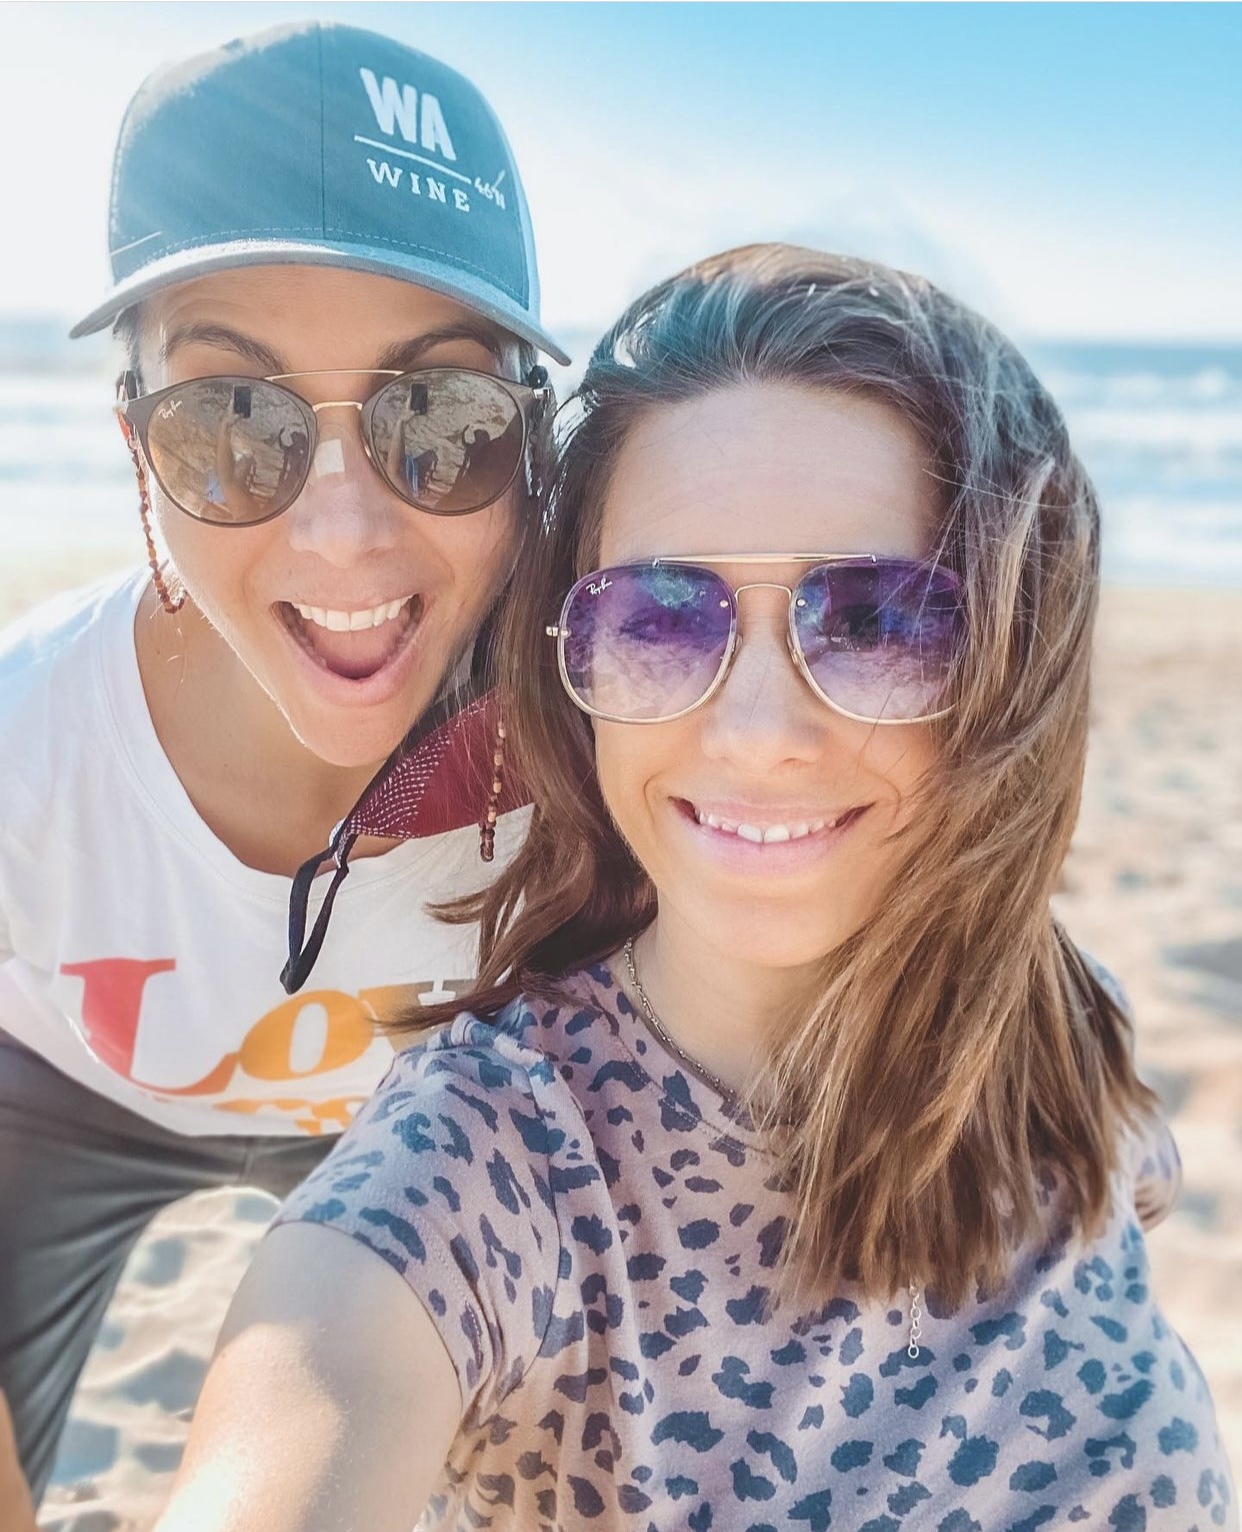 Two women in sunglasses smile in front of a sunny beach. The woman on the left wears a WA Wine ballcap.